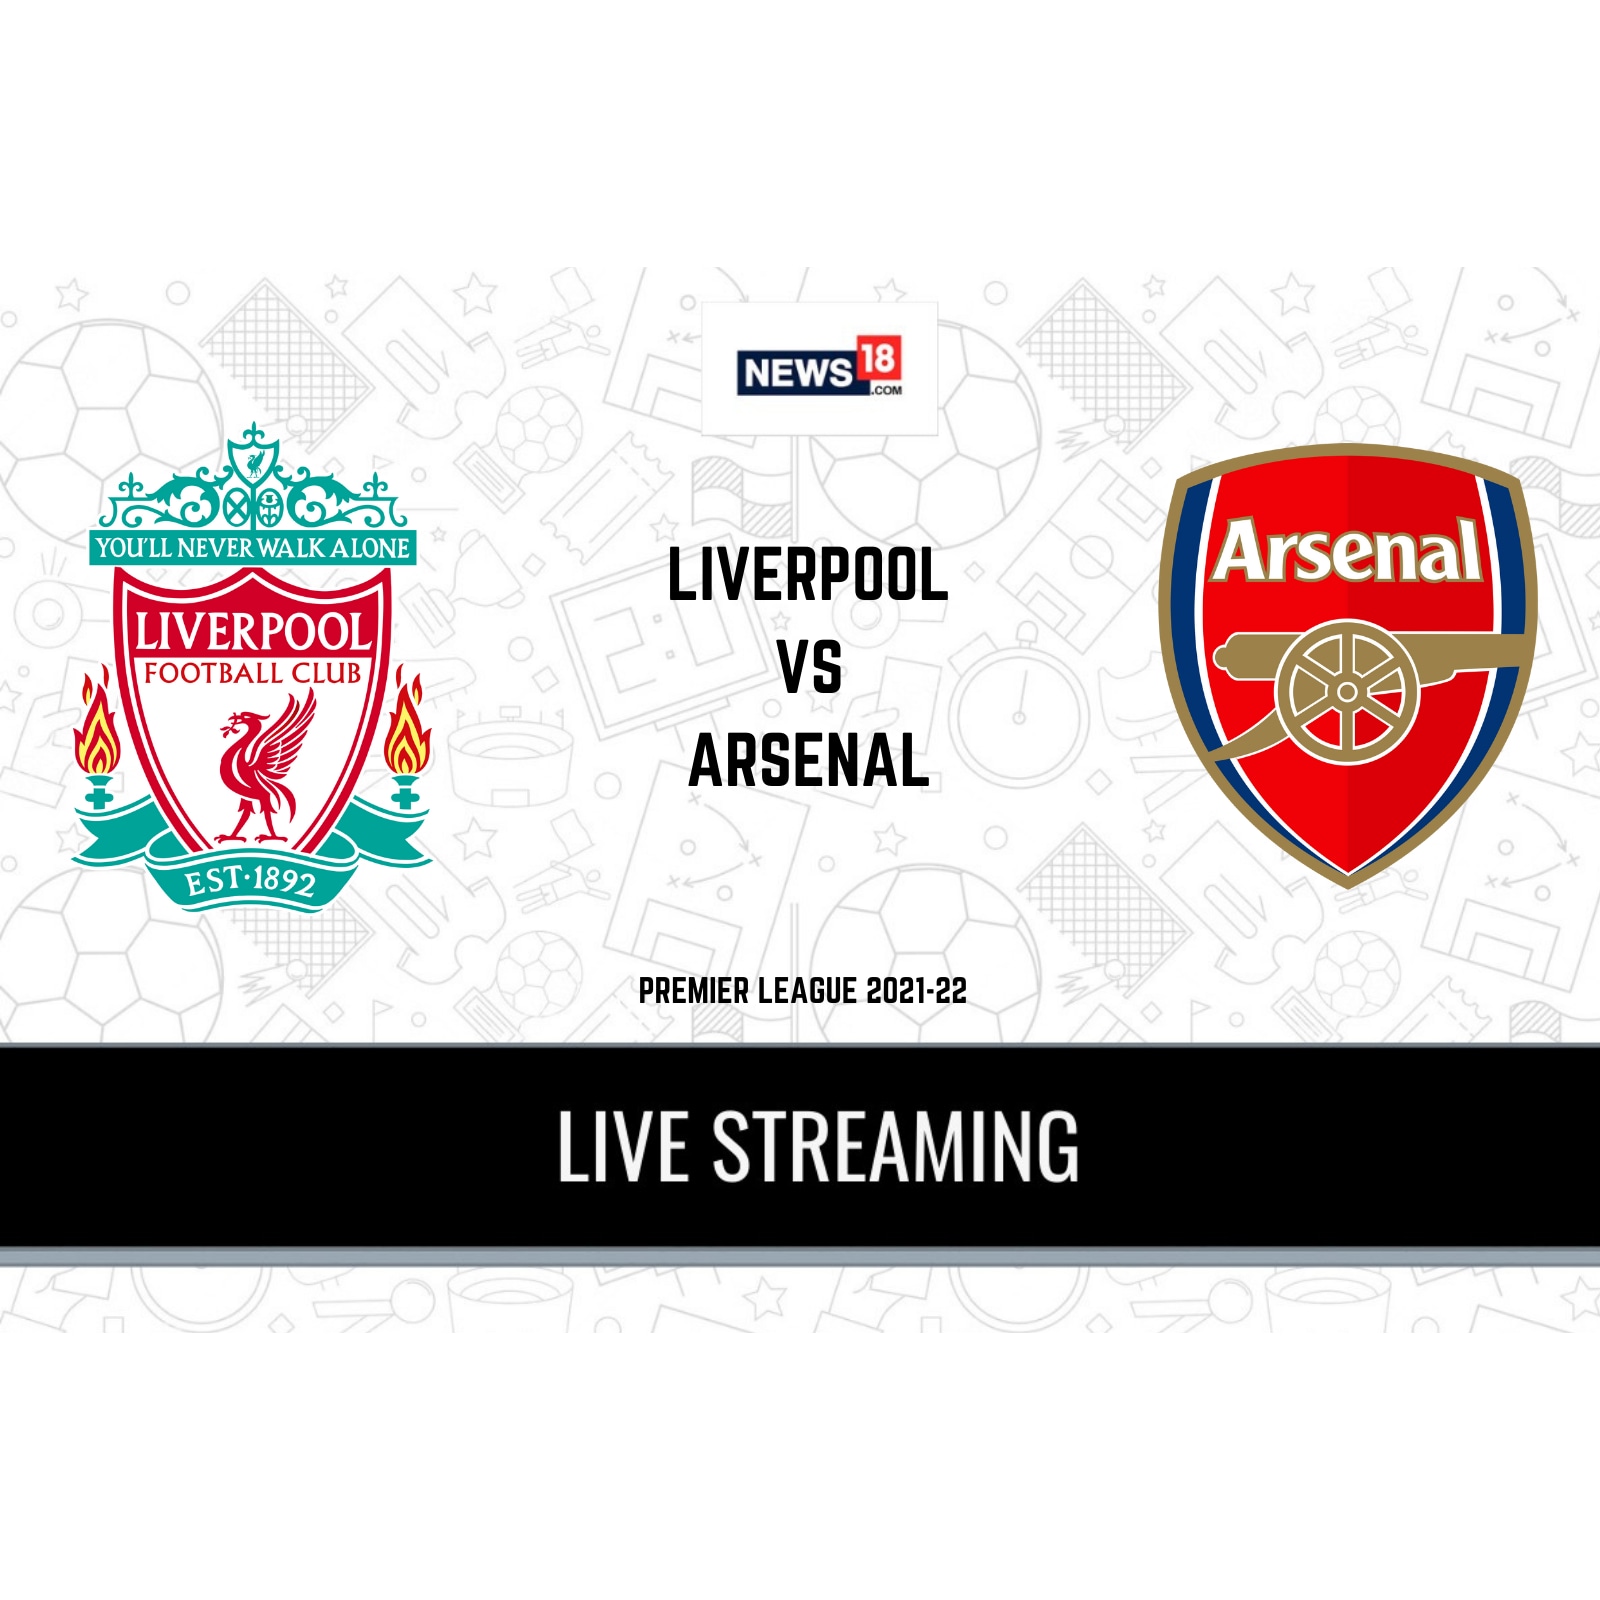 Premier League 2021-22 Liverpool vs Arsenal LIVE Streaming When and Where to Watch Online, TV Telecast, Team News